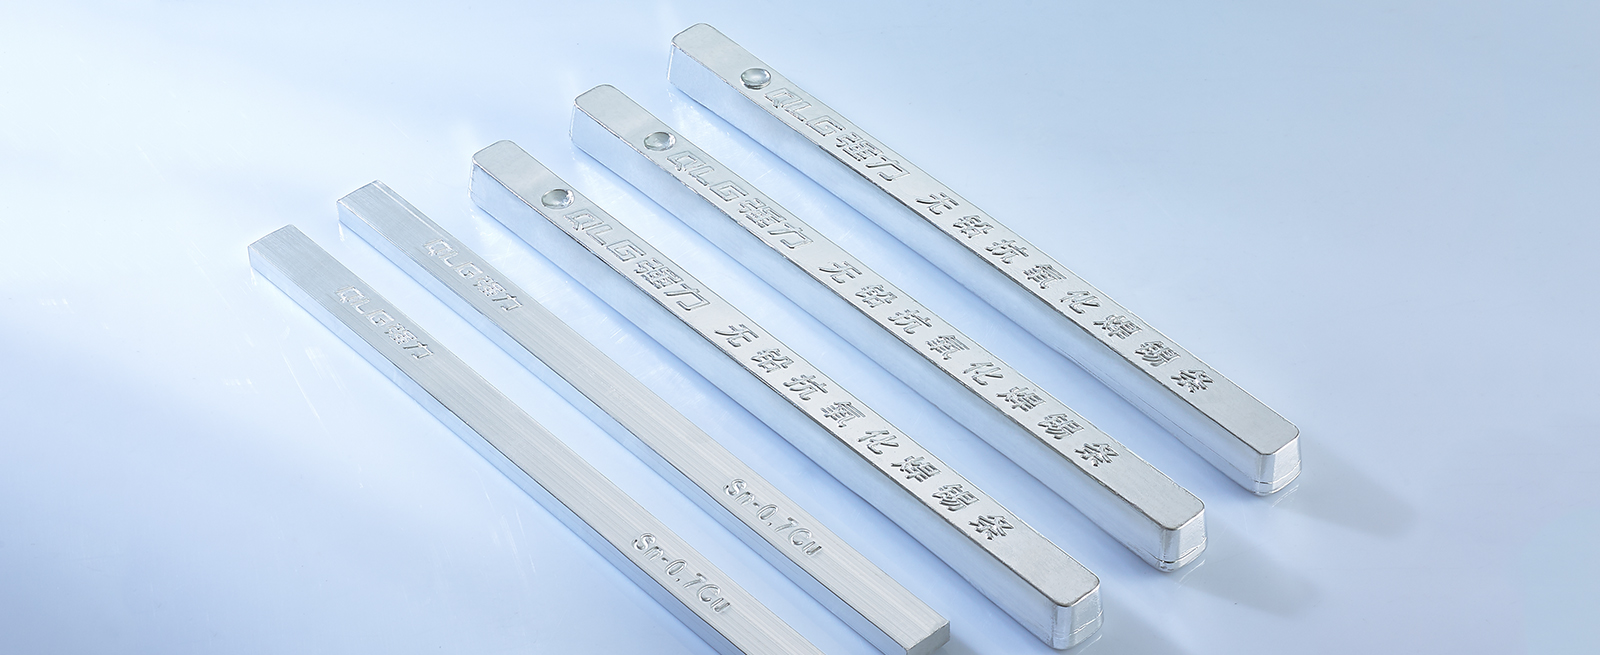 LEAD-FREE SOLDER BAR AND VARIETY